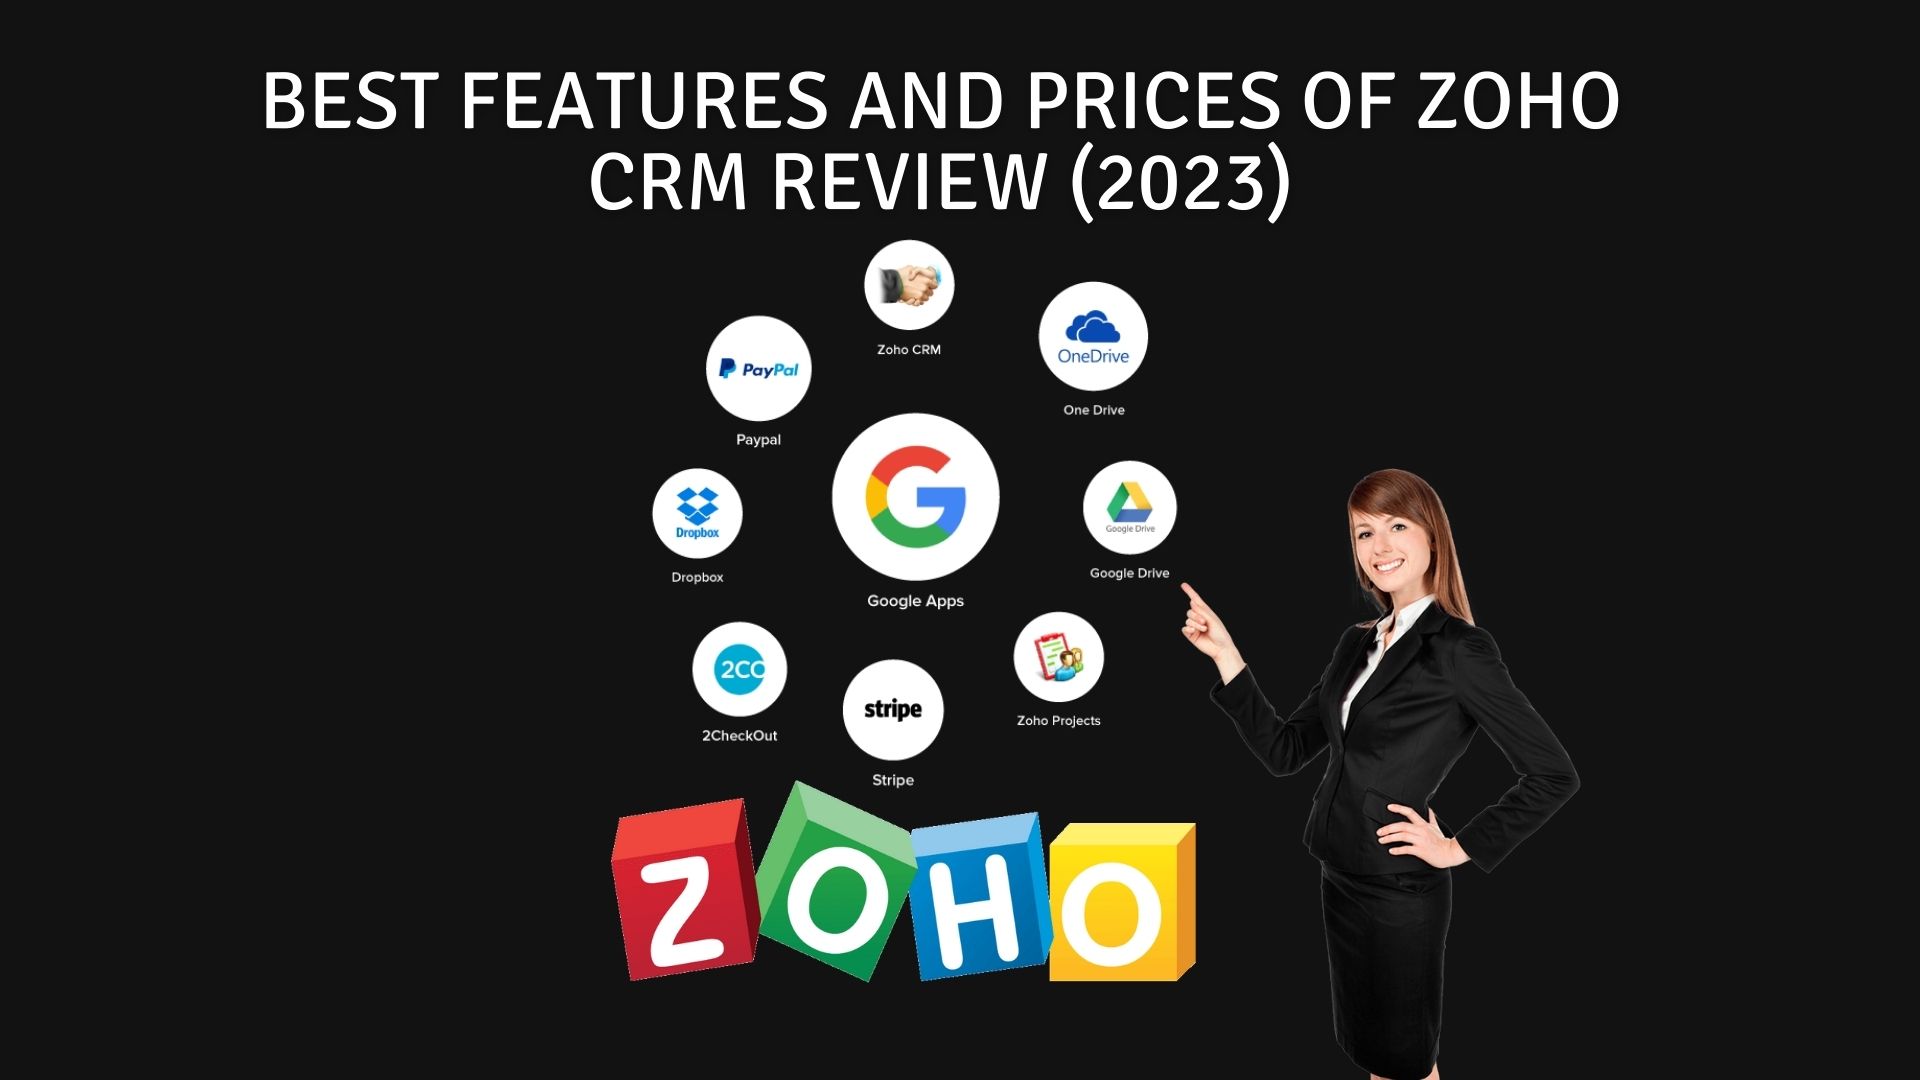 Best features and prices of zoho crm review (2023)